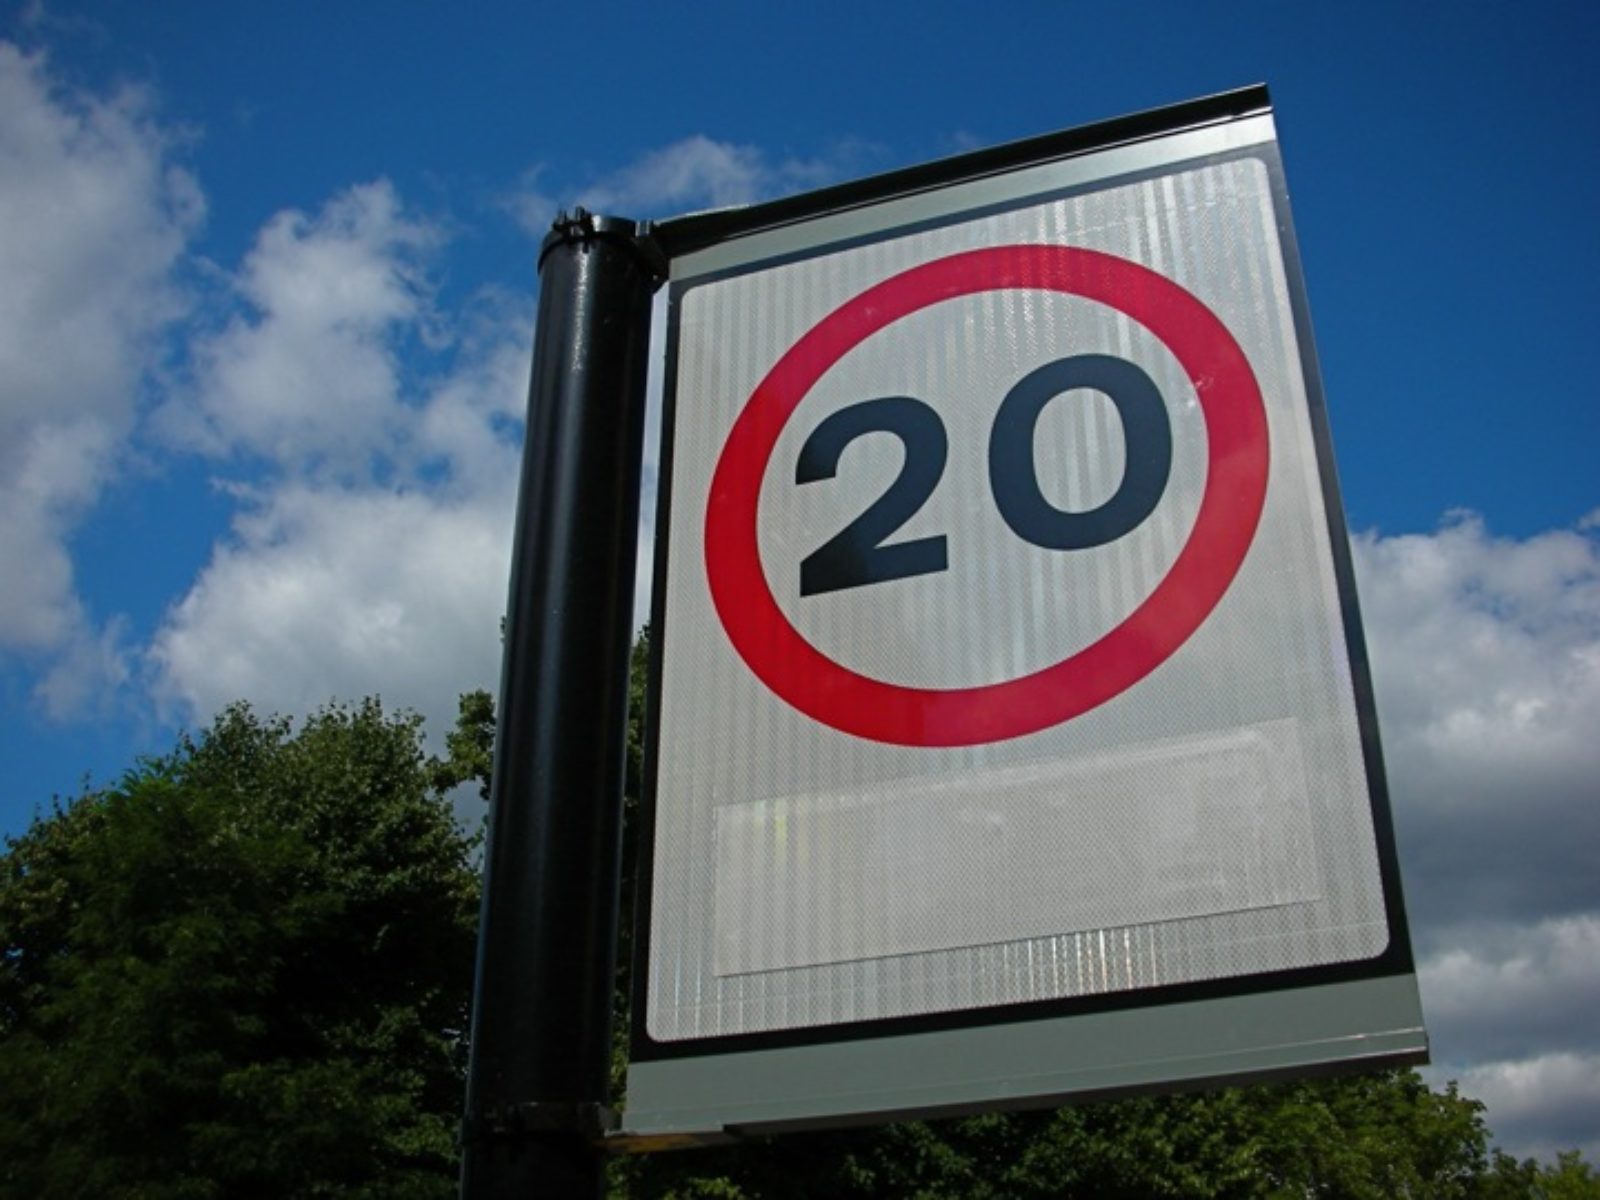 A street sign restricting car speeds to 20 miles per hour